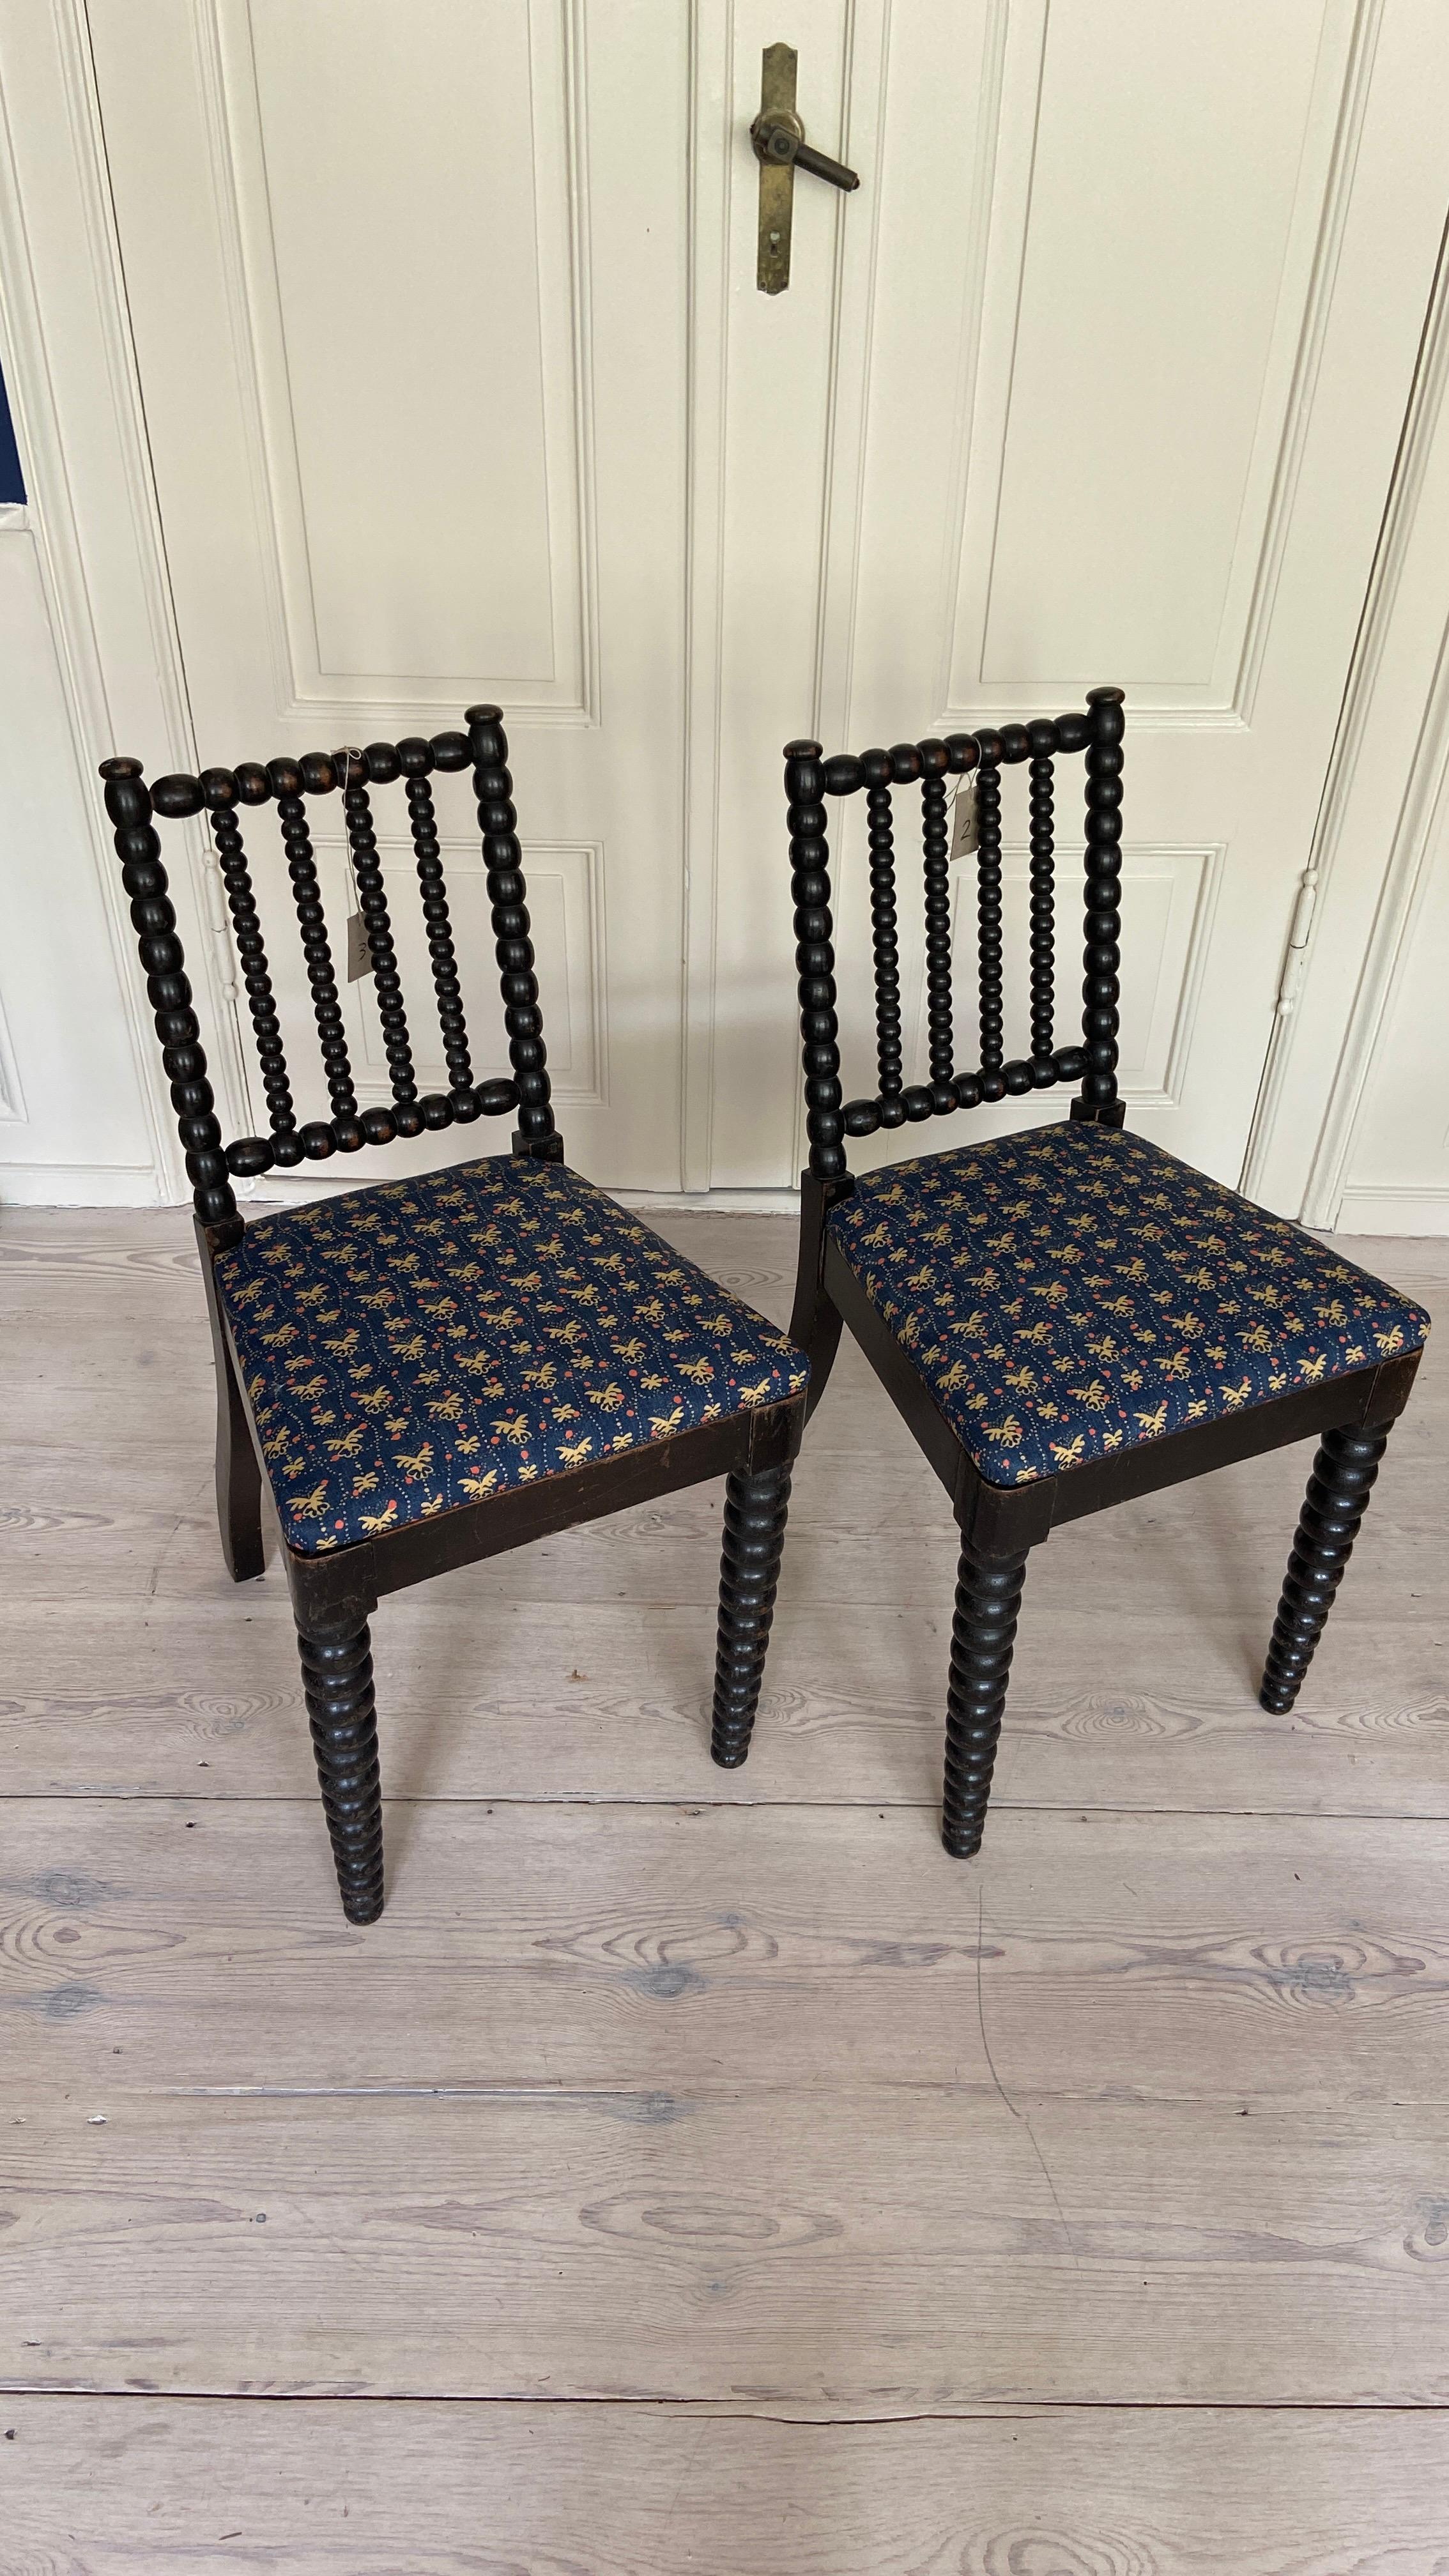 English Vintage Pair of Bobbin Chairs with New Blue Upholstery, England 19th Century For Sale